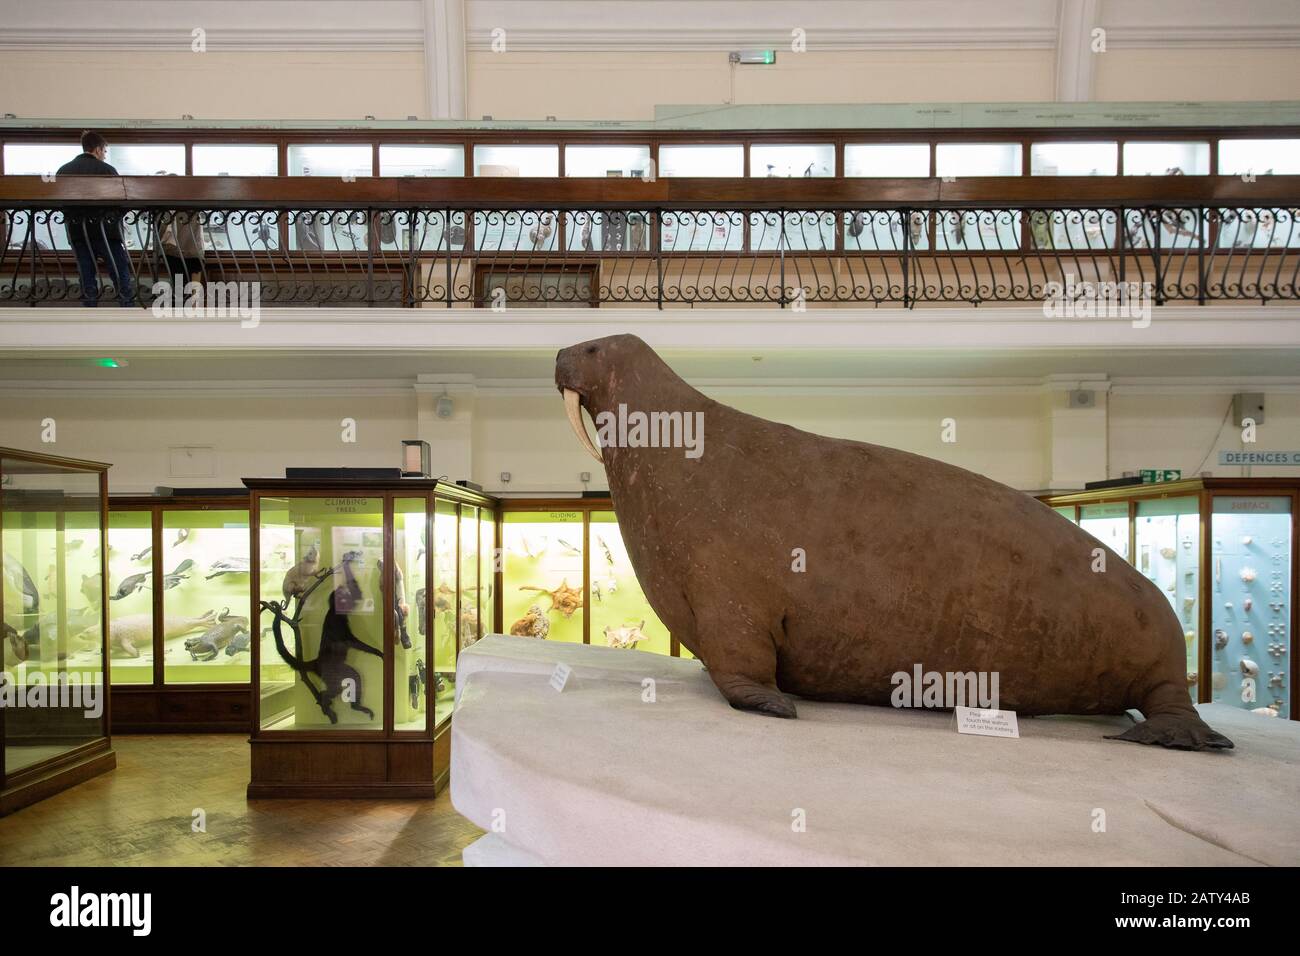 Natural History Gallery, The Horniman Museum, London Stockfoto